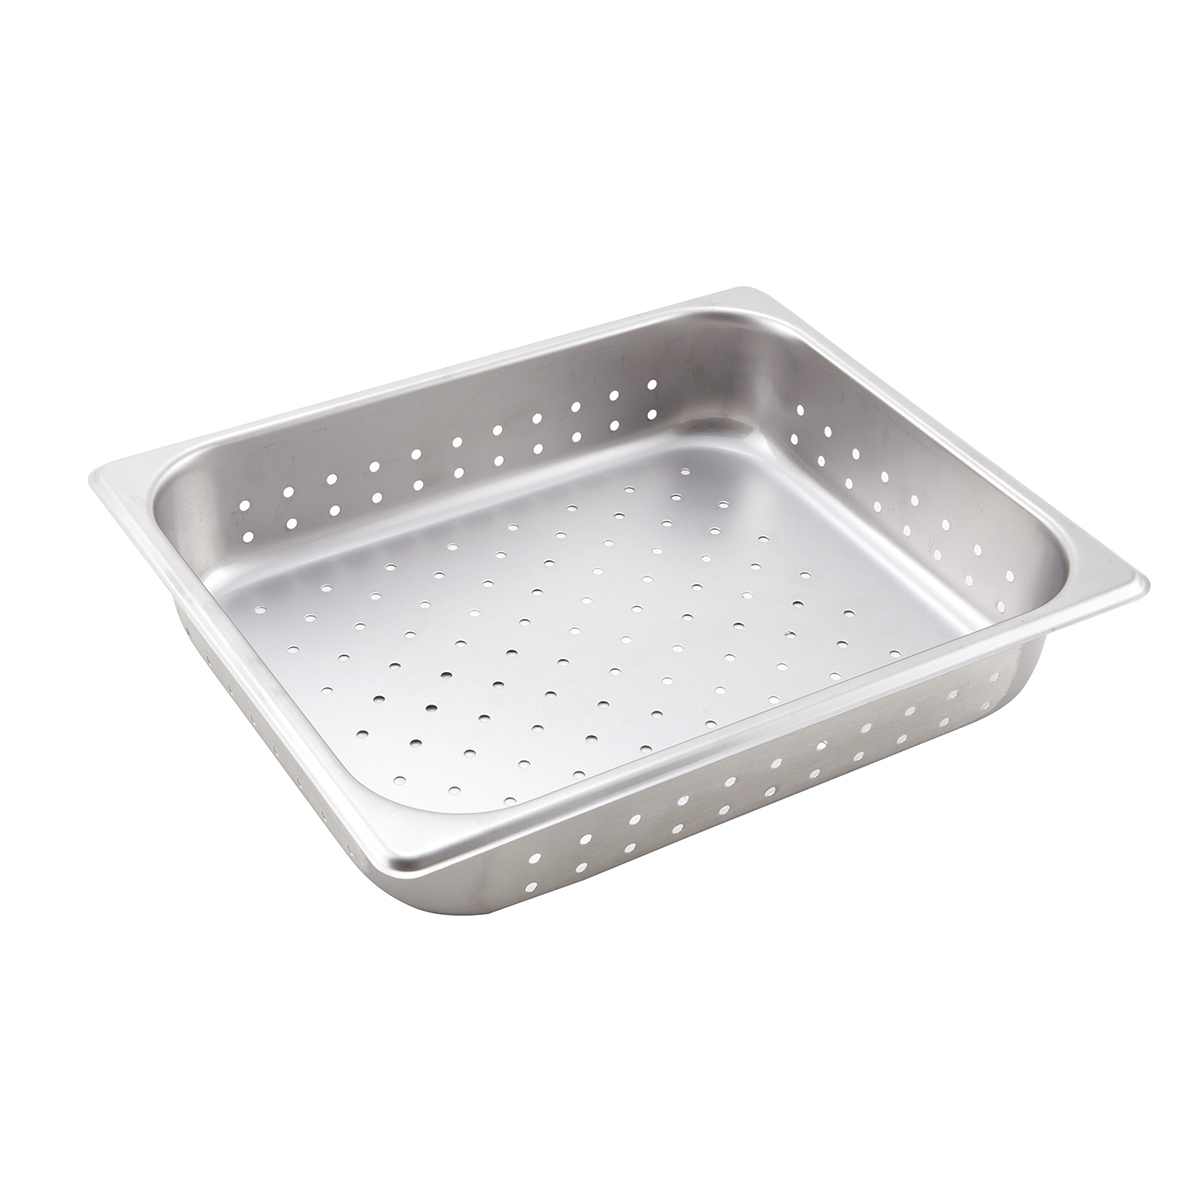 Winco Perforated Steam Pan, Half Size (10-3/8" x 12-3/4") x 2-1/2"